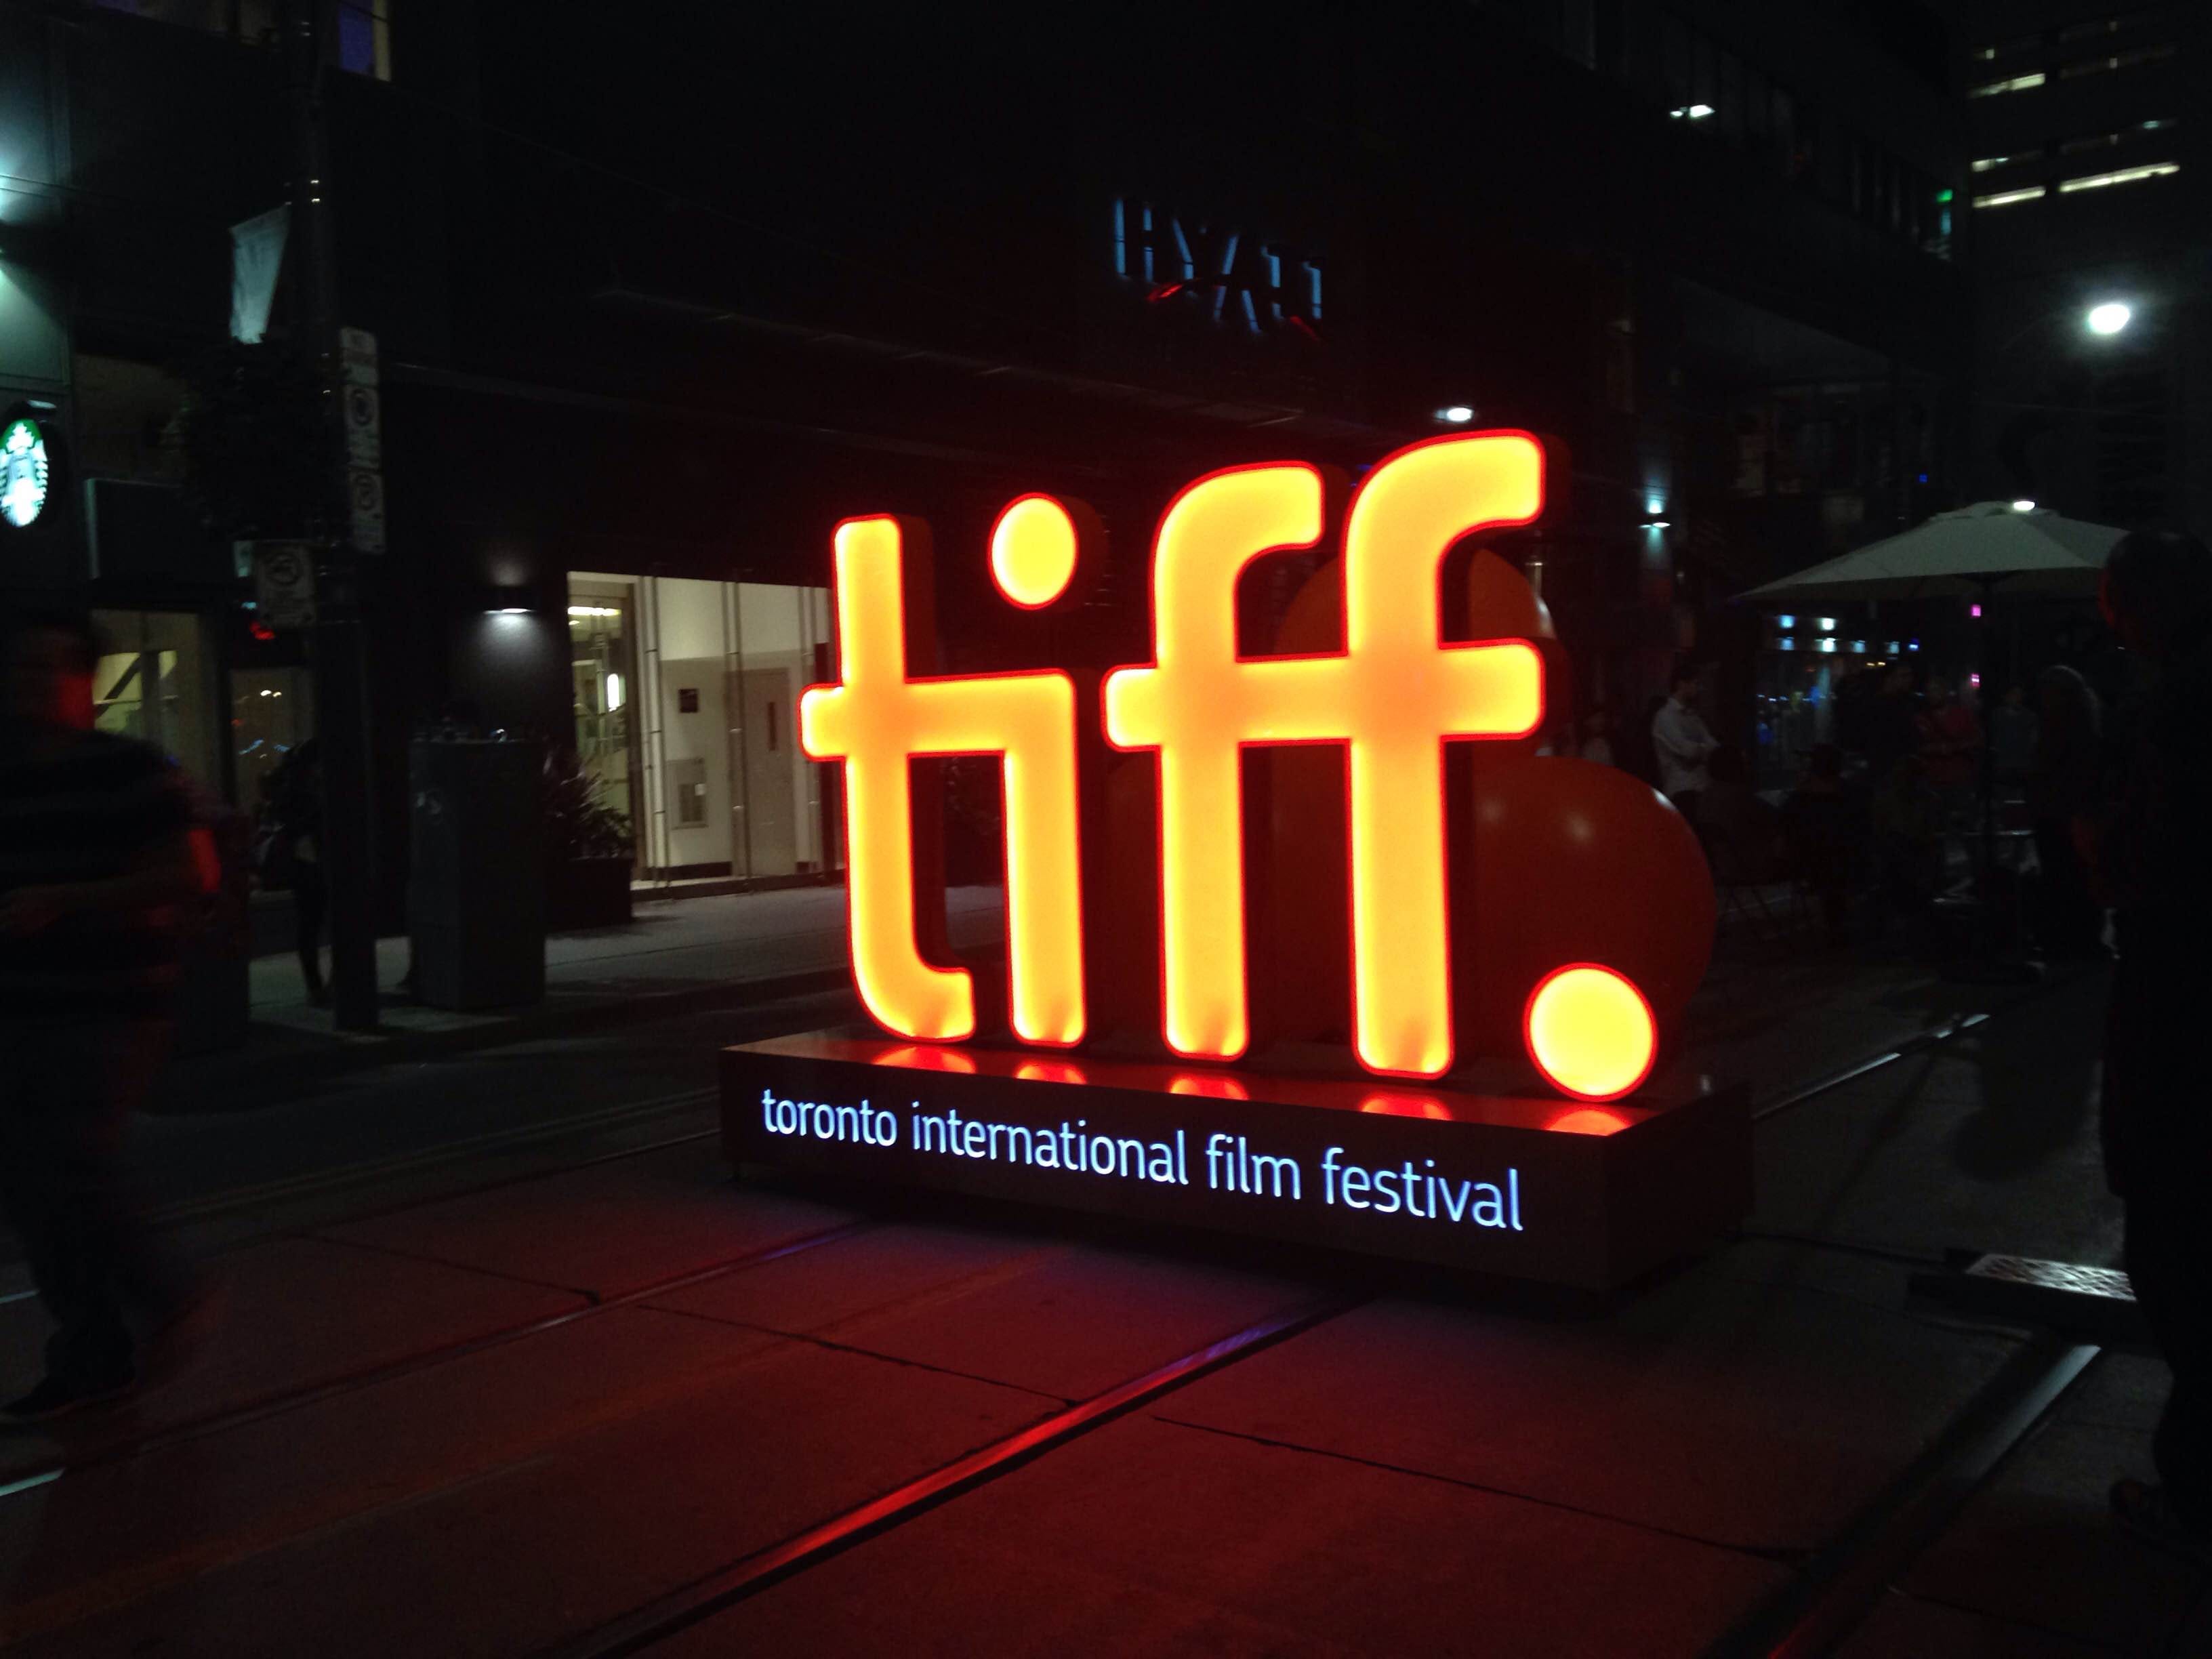 A Postcard from the Toronto International Film Festival by Kate Hagen